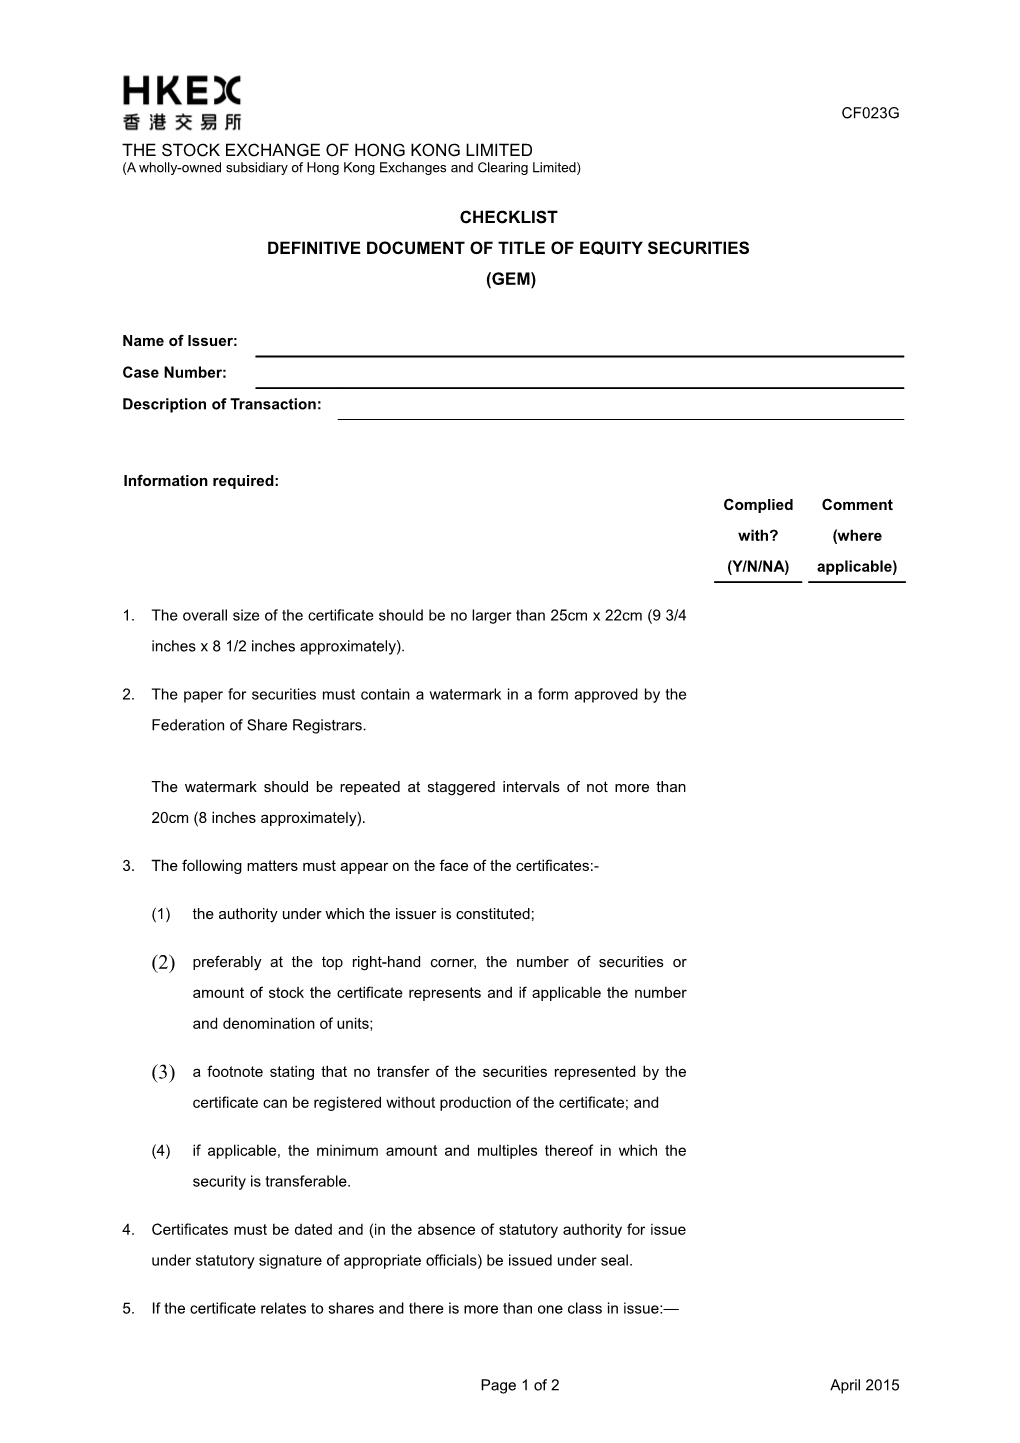 Checklist for Definitive Documents of Title - Equity Securities